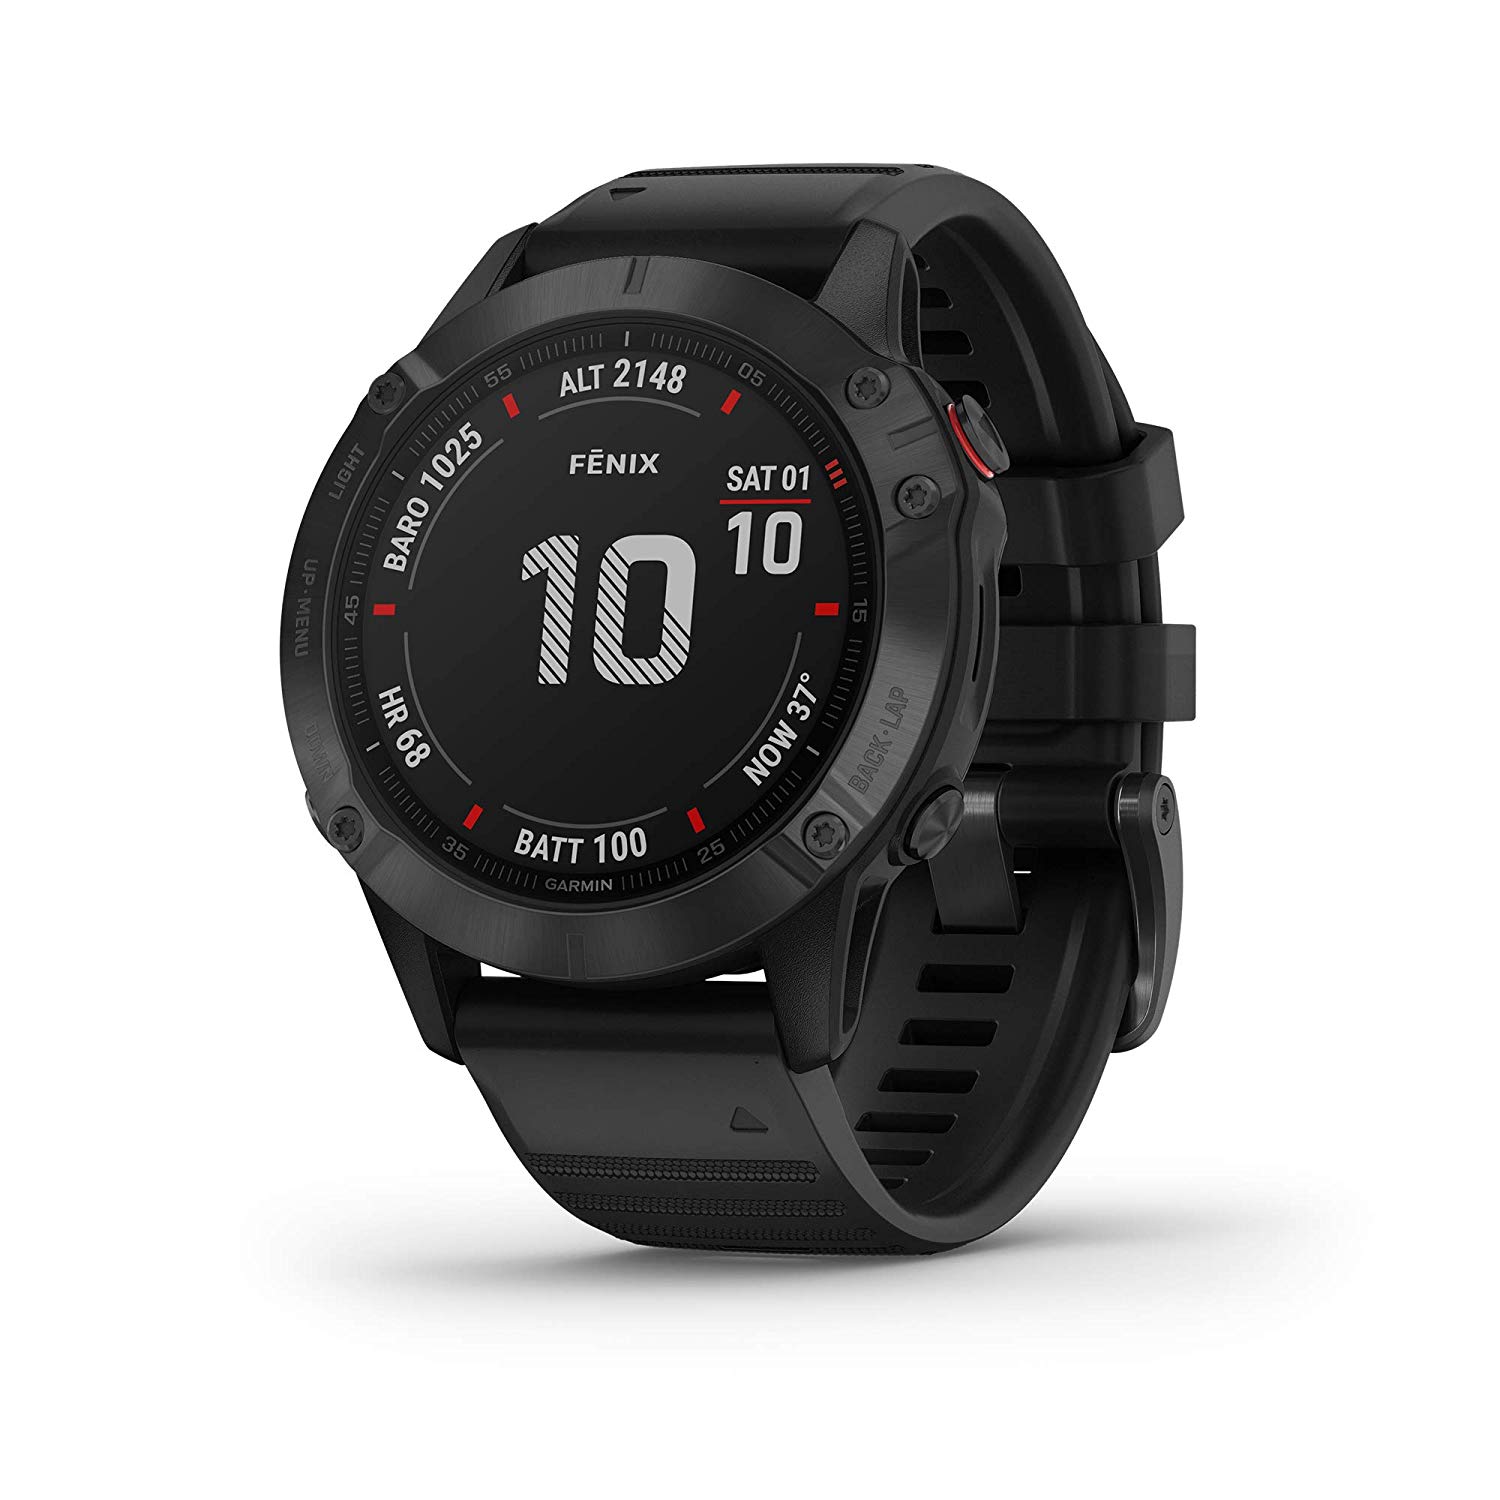 Garmin Fenix 6 Pro/6 Pro Solar Full Specifications and Features